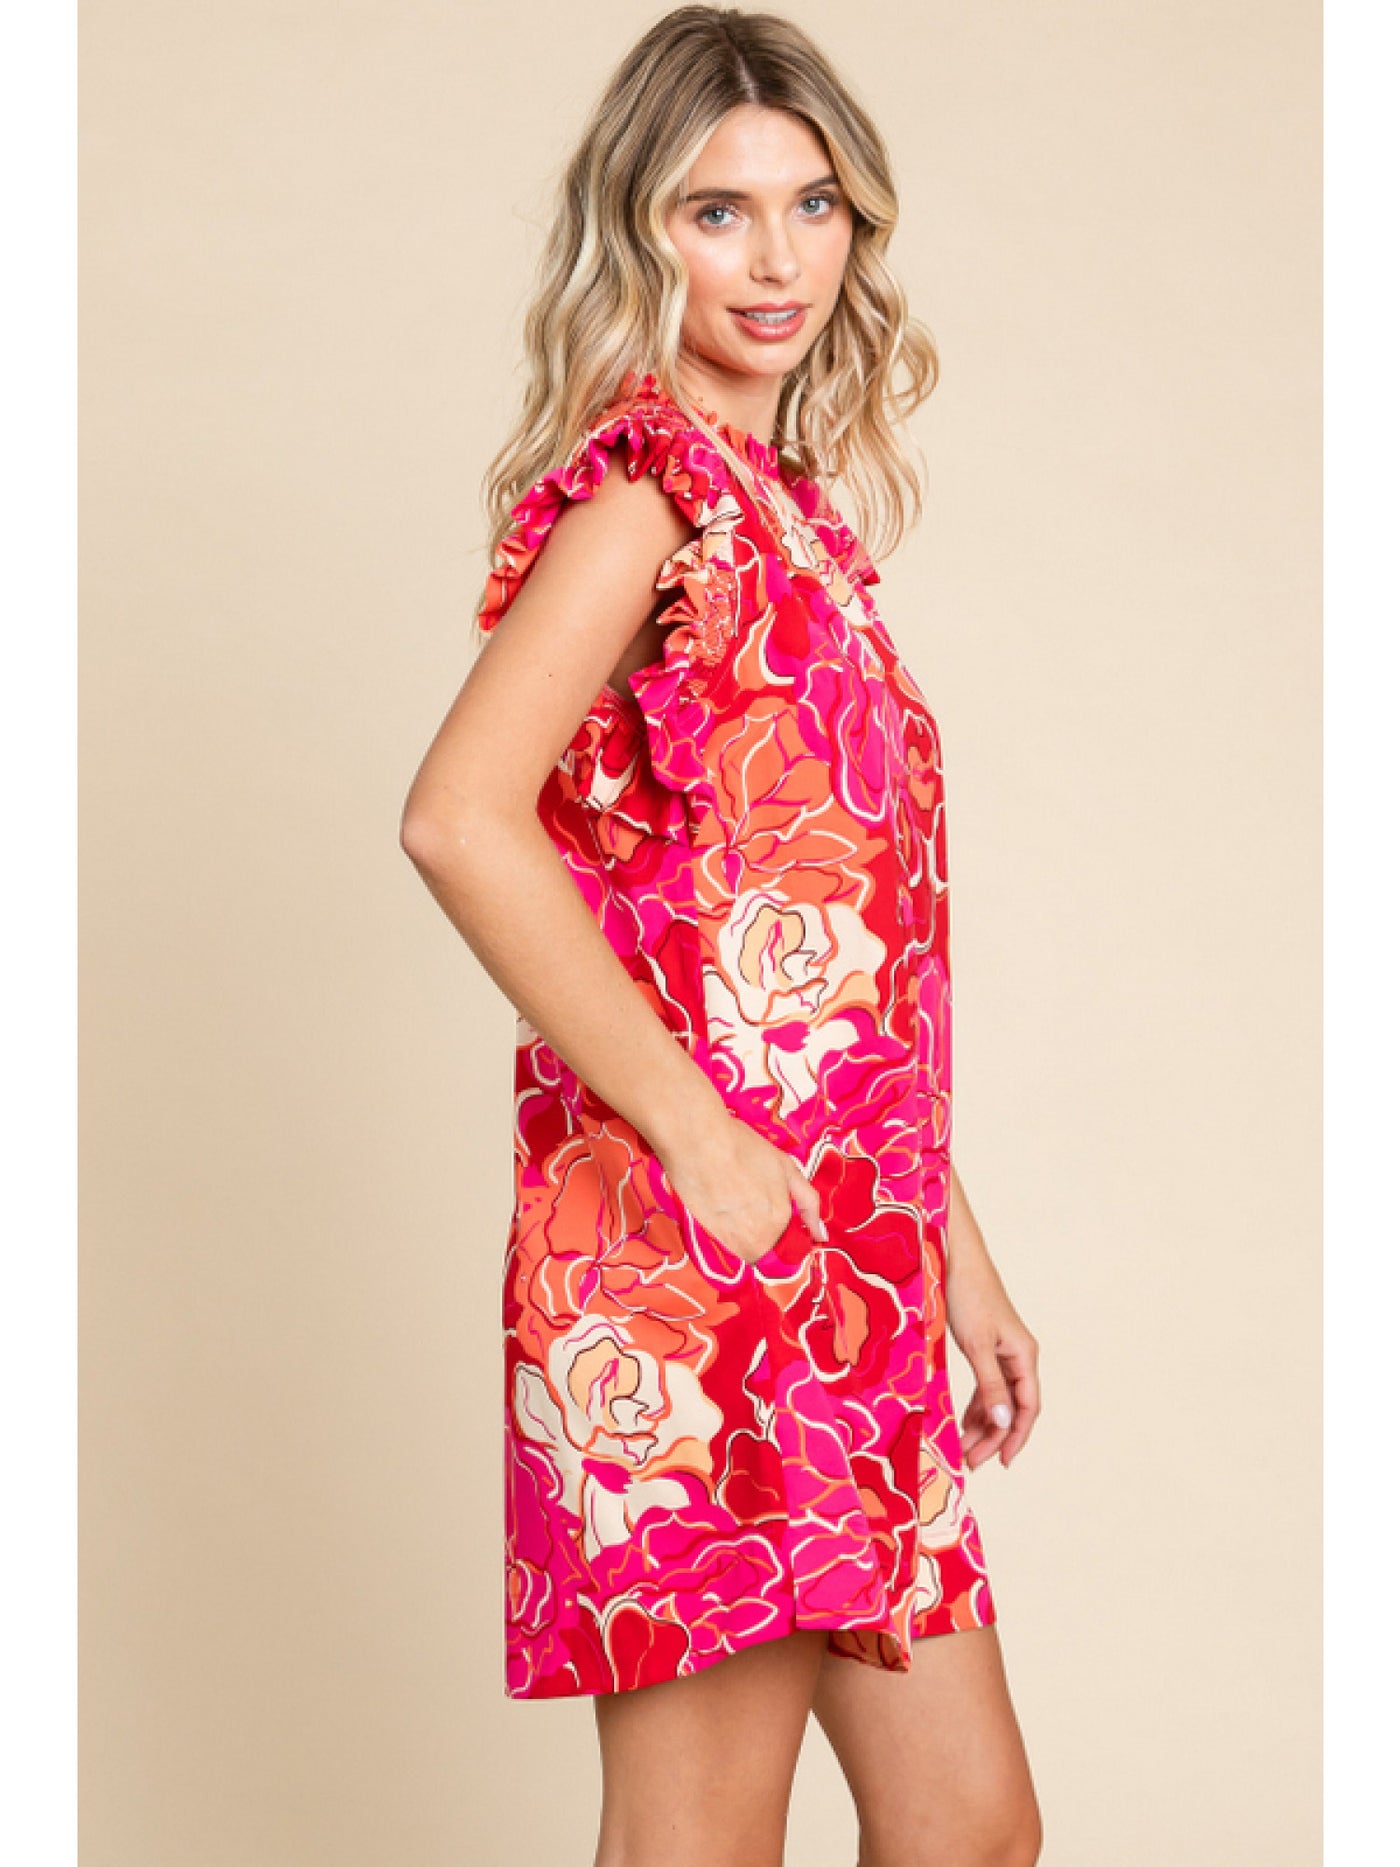 Red Multi Flower Print Dress with Ruffled Shoulders and Pockets